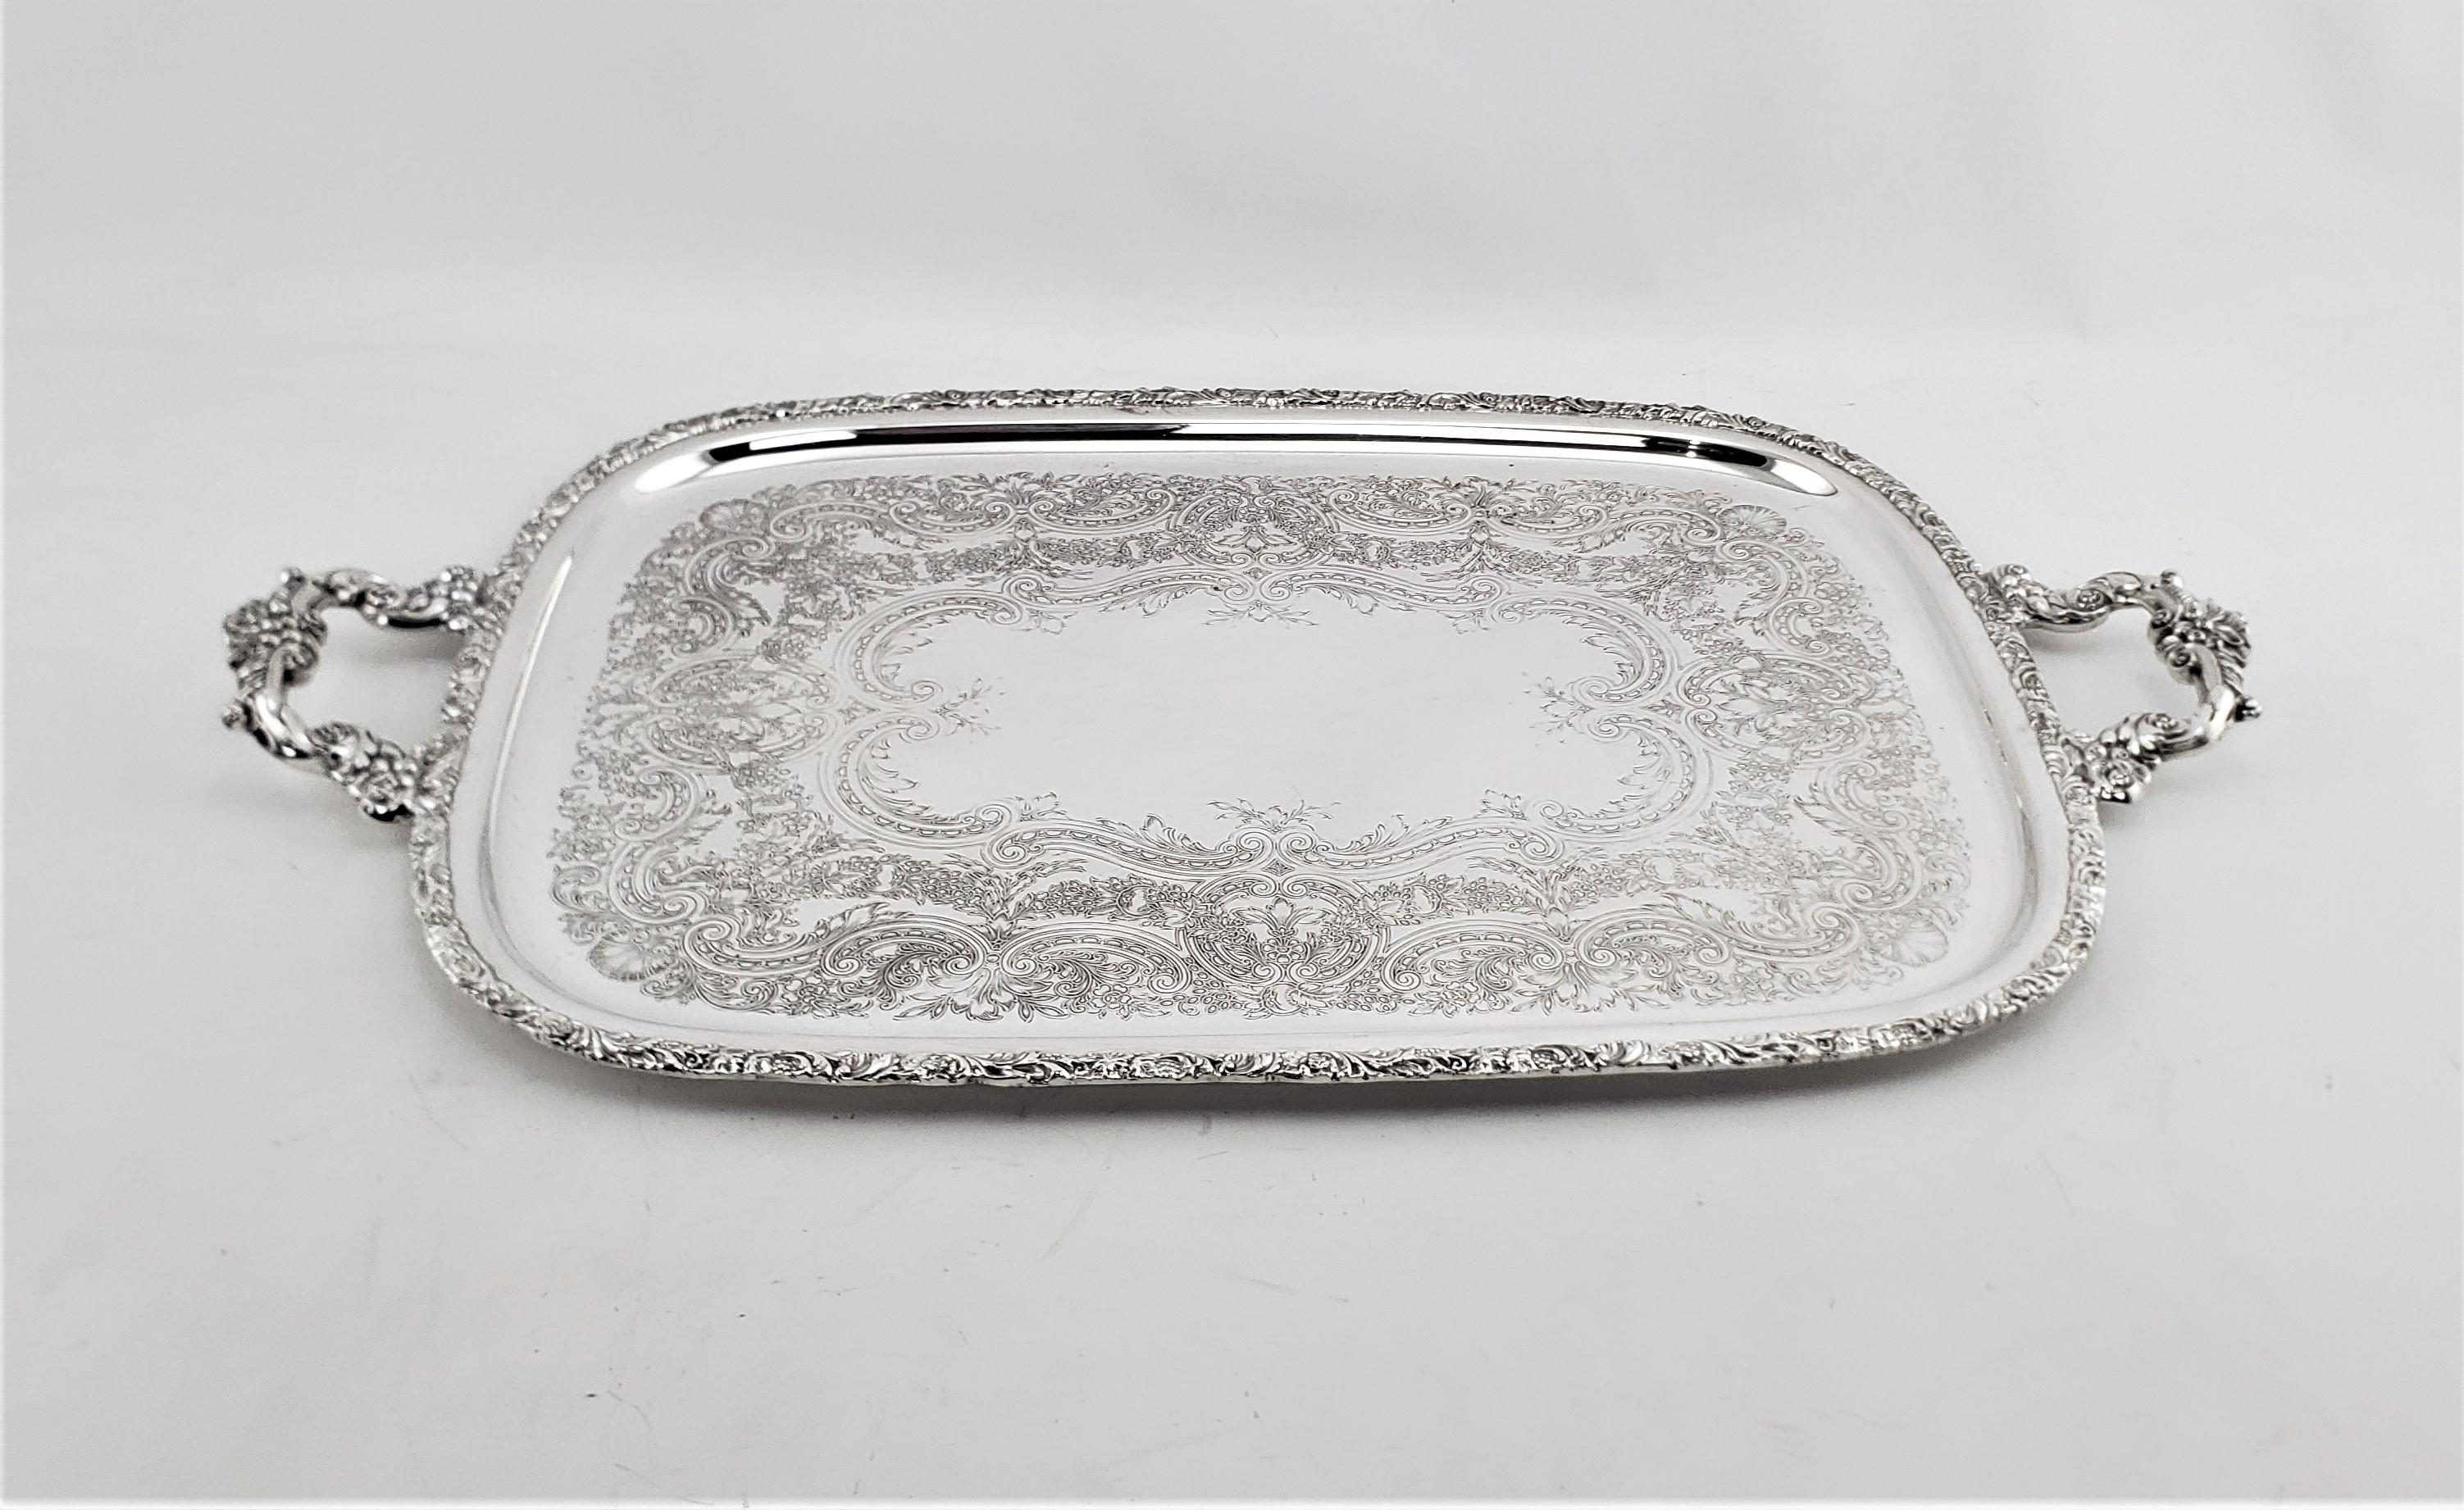 This large silver plated serving tray was made by the International Silver Co. or England is approximately 1920 in a Victorian style. The surface of the tray is ornately engraved with stylized scrolling leaf, and accented by elaborately cast